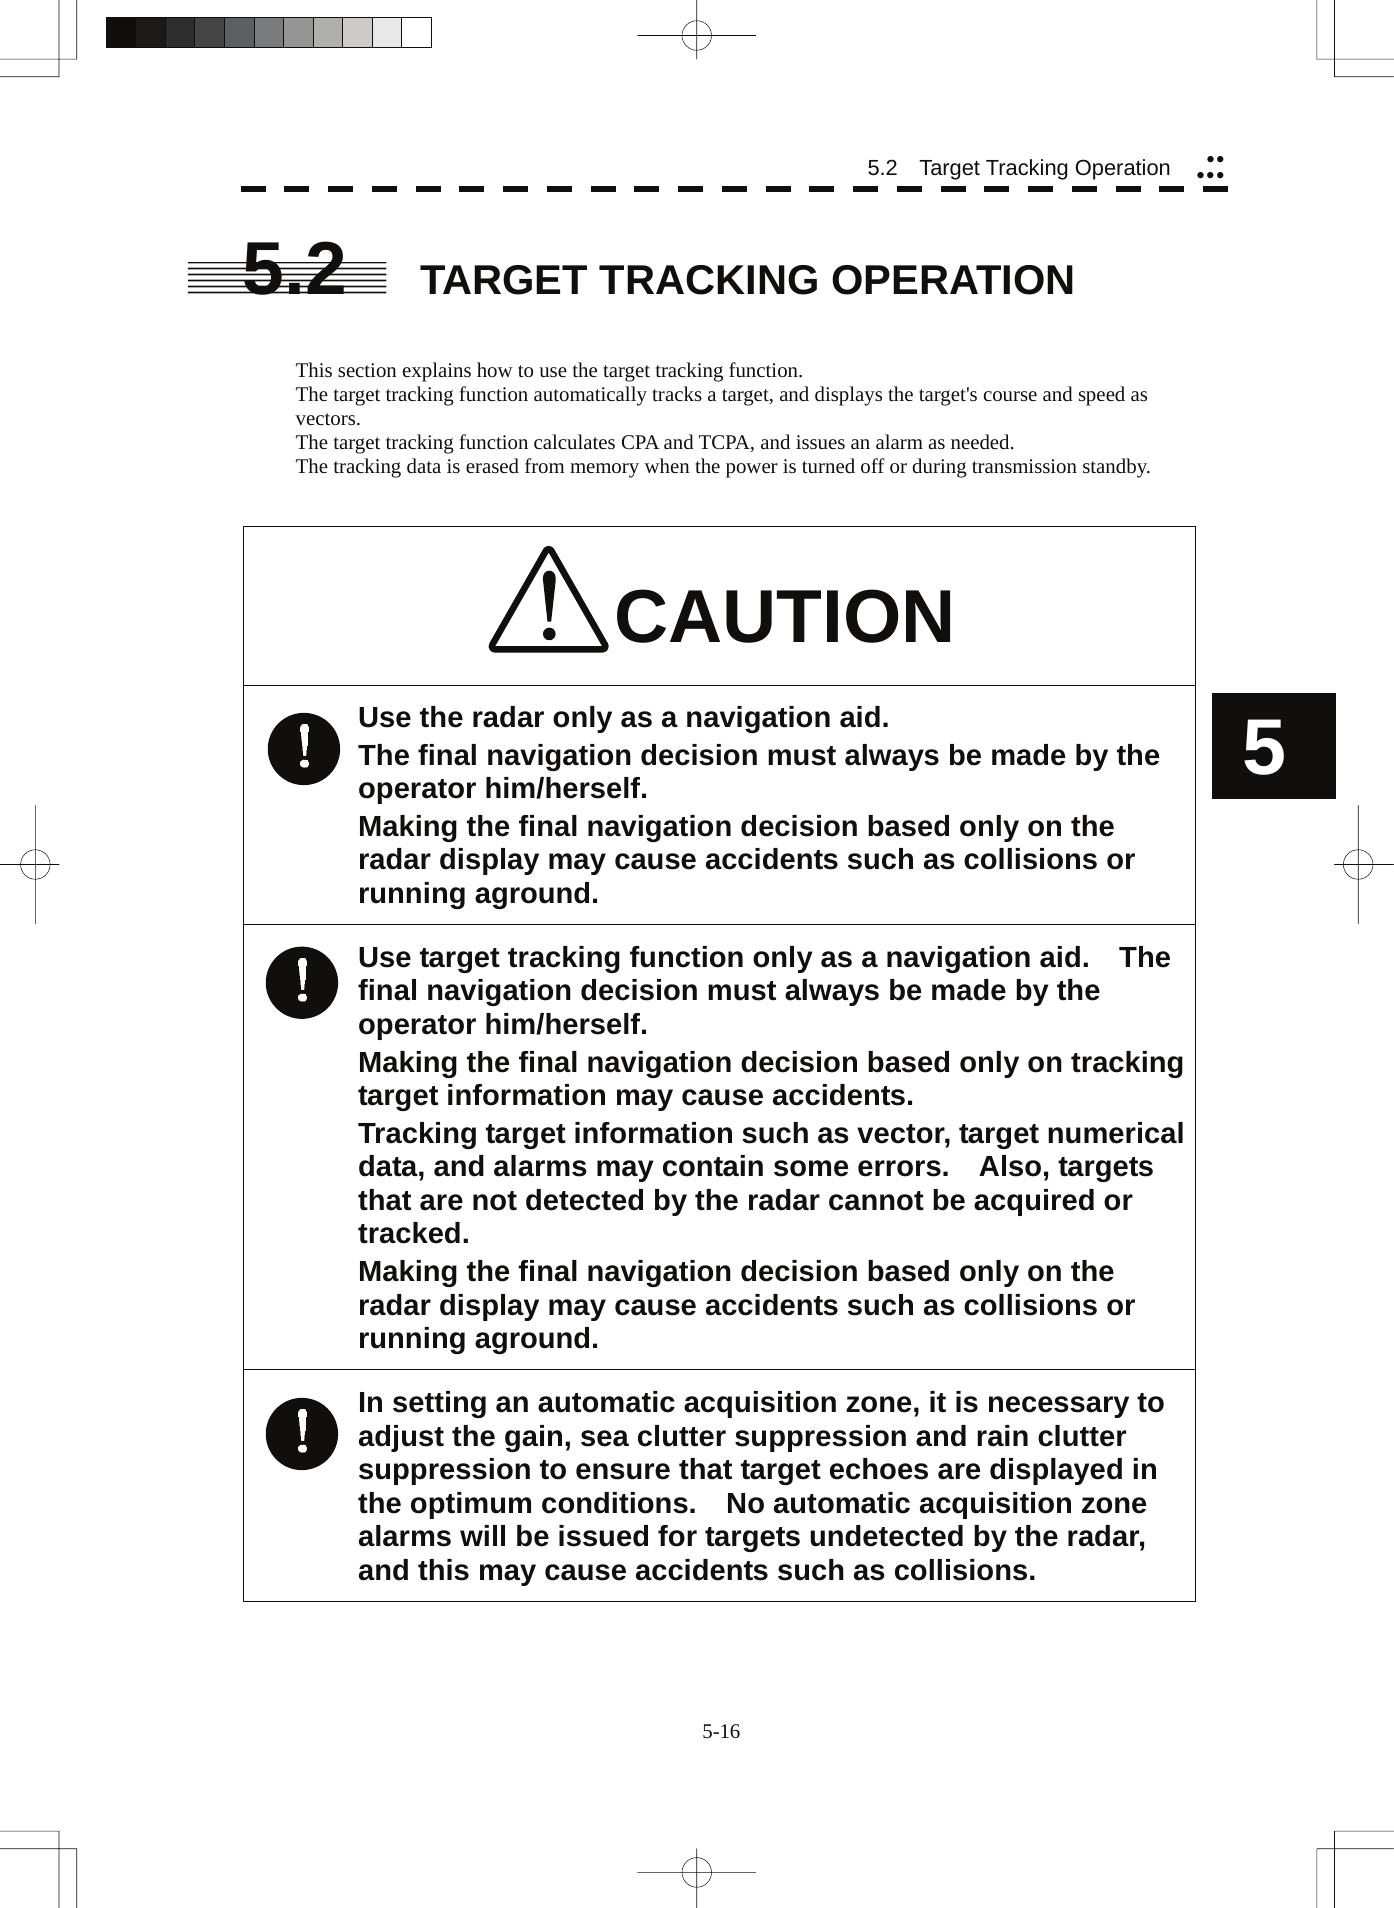  5-16 5.2   Target Tracking Operation yyyyy5 5.2  TARGET TRACKING OPERATION   This section explains how to use the target tracking function. The target tracking function automatically tracks a target, and displays the target&apos;s course and speed as vectors. The target tracking function calculates CPA and TCPA, and issues an alarm as needed. The tracking data is erased from memory when the power is turned off or during transmission standby.   CAUTION Use the radar only as a navigation aid. The final navigation decision must always be made by the operator him/herself. Making the final navigation decision based only on the radar display may cause accidents such as collisions or running aground. Use target tracking function only as a navigation aid.    The final navigation decision must always be made by the operator him/herself. Making the final navigation decision based only on tracking target information may cause accidents. Tracking target information such as vector, target numerical data, and alarms may contain some errors.    Also, targets that are not detected by the radar cannot be acquired or tracked. Making the final navigation decision based only on the radar display may cause accidents such as collisions or running aground. In setting an automatic acquisition zone, it is necessary to adjust the gain, sea clutter suppression and rain clutter suppression to ensure that target echoes are displayed in the optimum conditions.    No automatic acquisition zone alarms will be issued for targets undetected by the radar, and this may cause accidents such as collisions.   